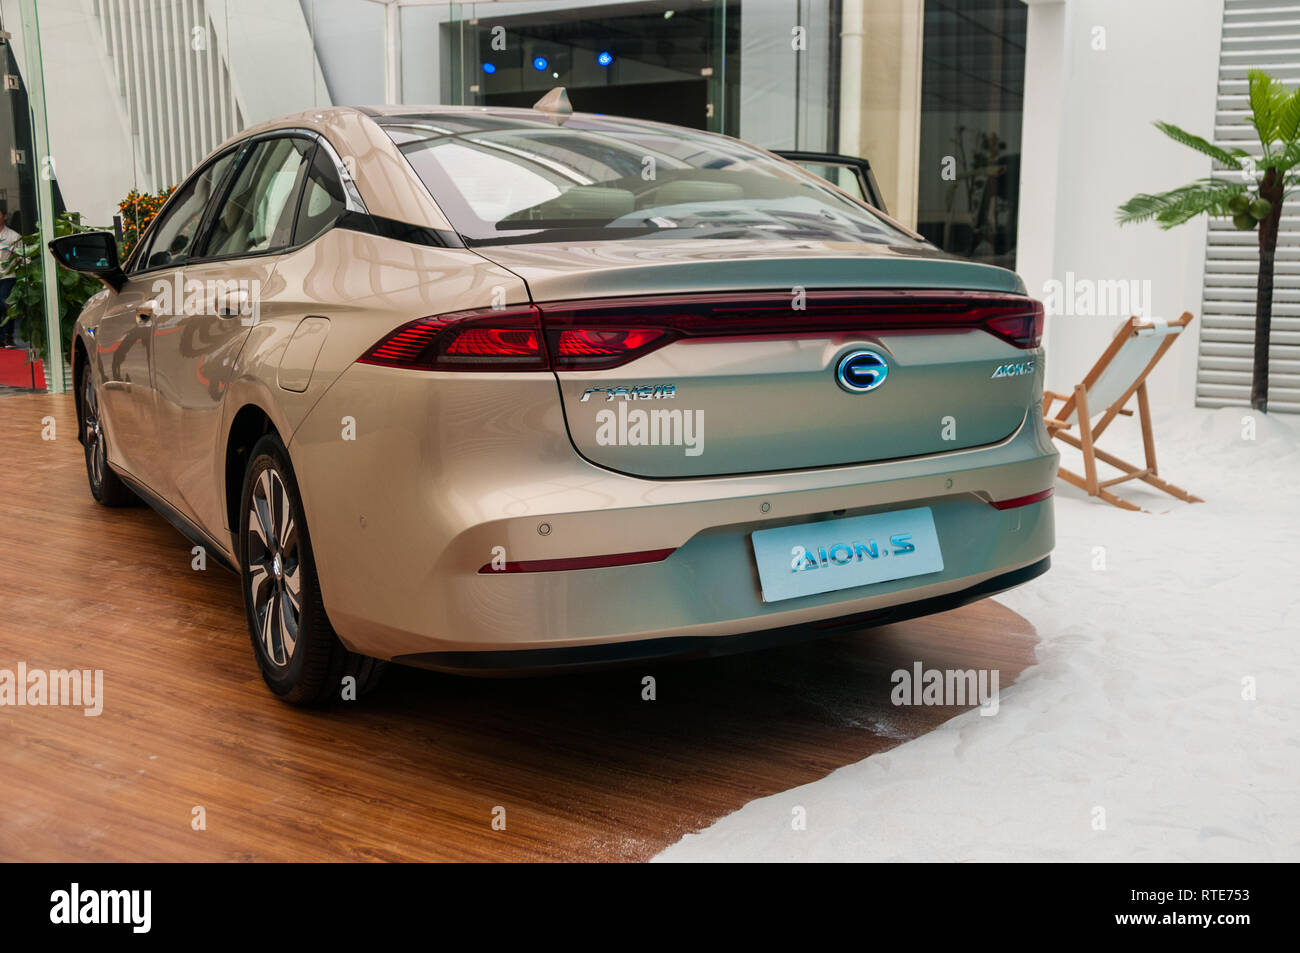 Guangzhou, China. 1st March, 2019. Official launch of the GAC NE Aion S electric car billed as the Chinese Tesla Model 3 killer at the GAC NE factory in Guangzhou, Guangdong Province, China. Mark Andrews/Alamy Live News Stock Photo